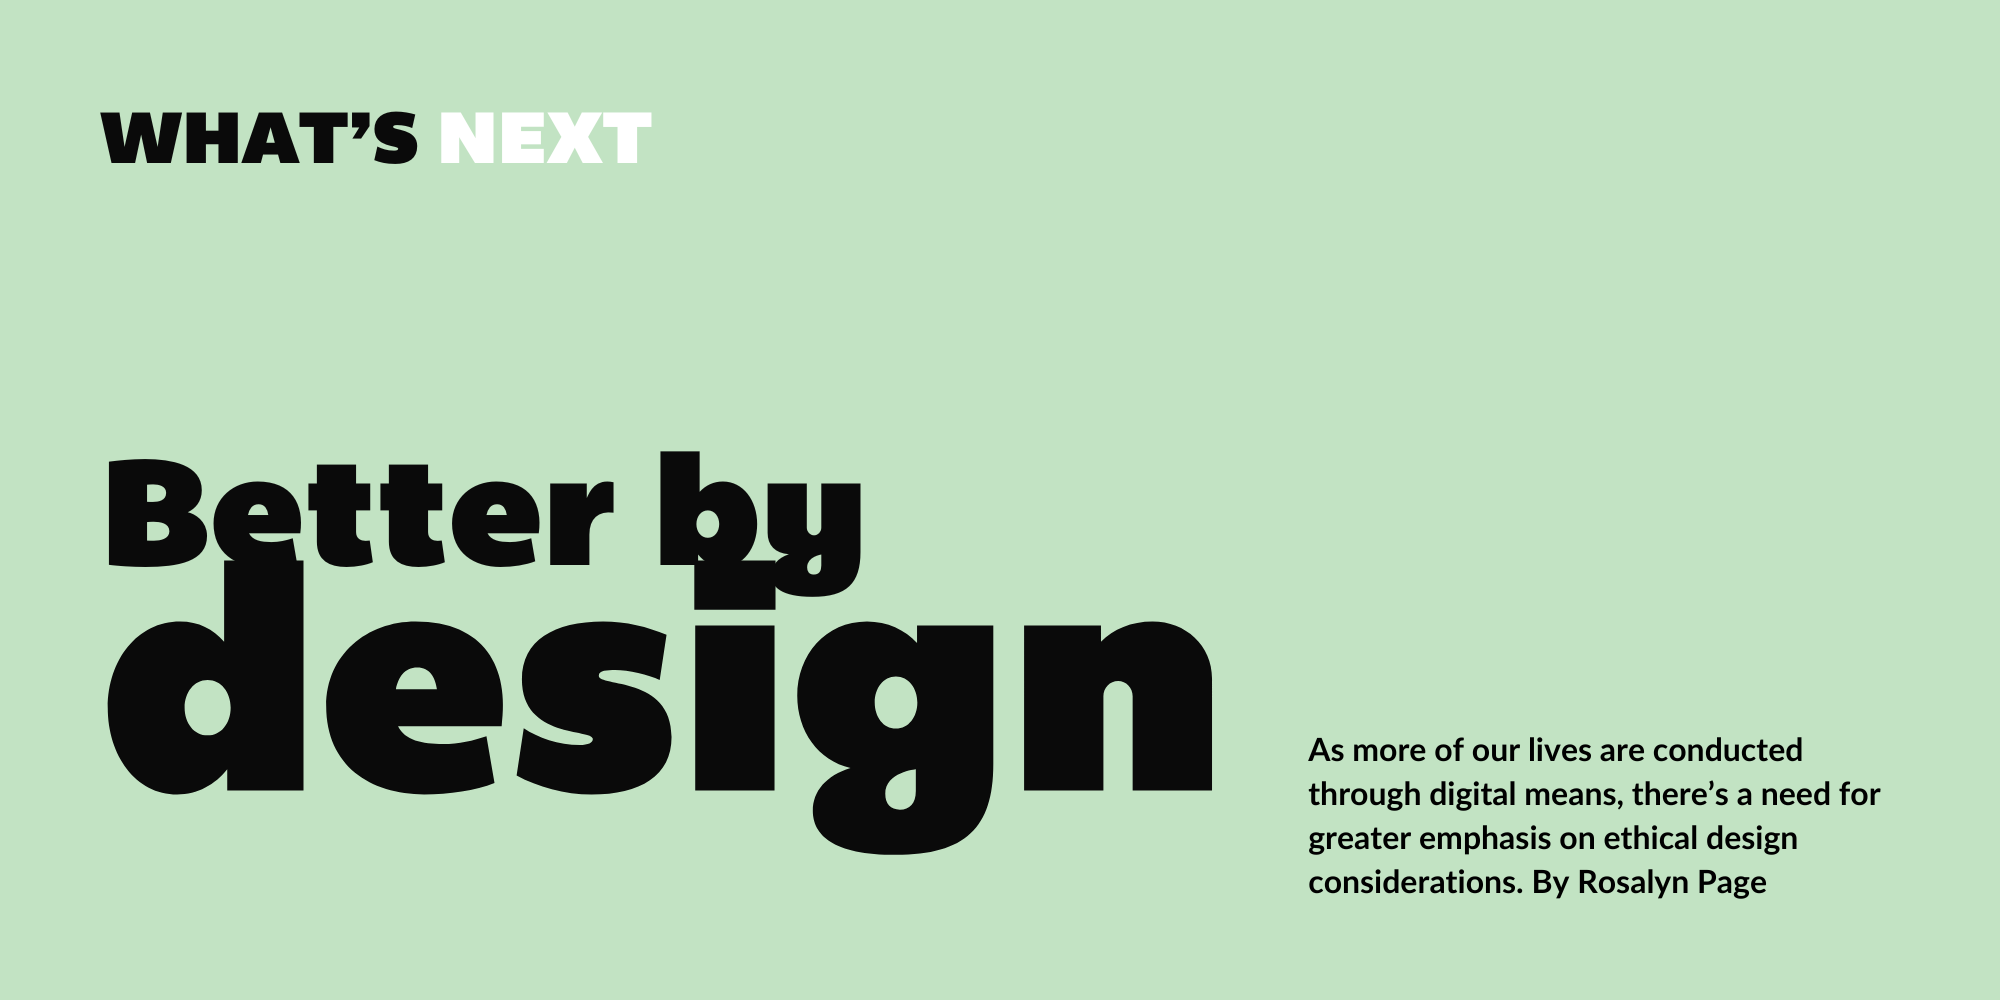 Issue 2 - WHAT'S NEXT: Better by design